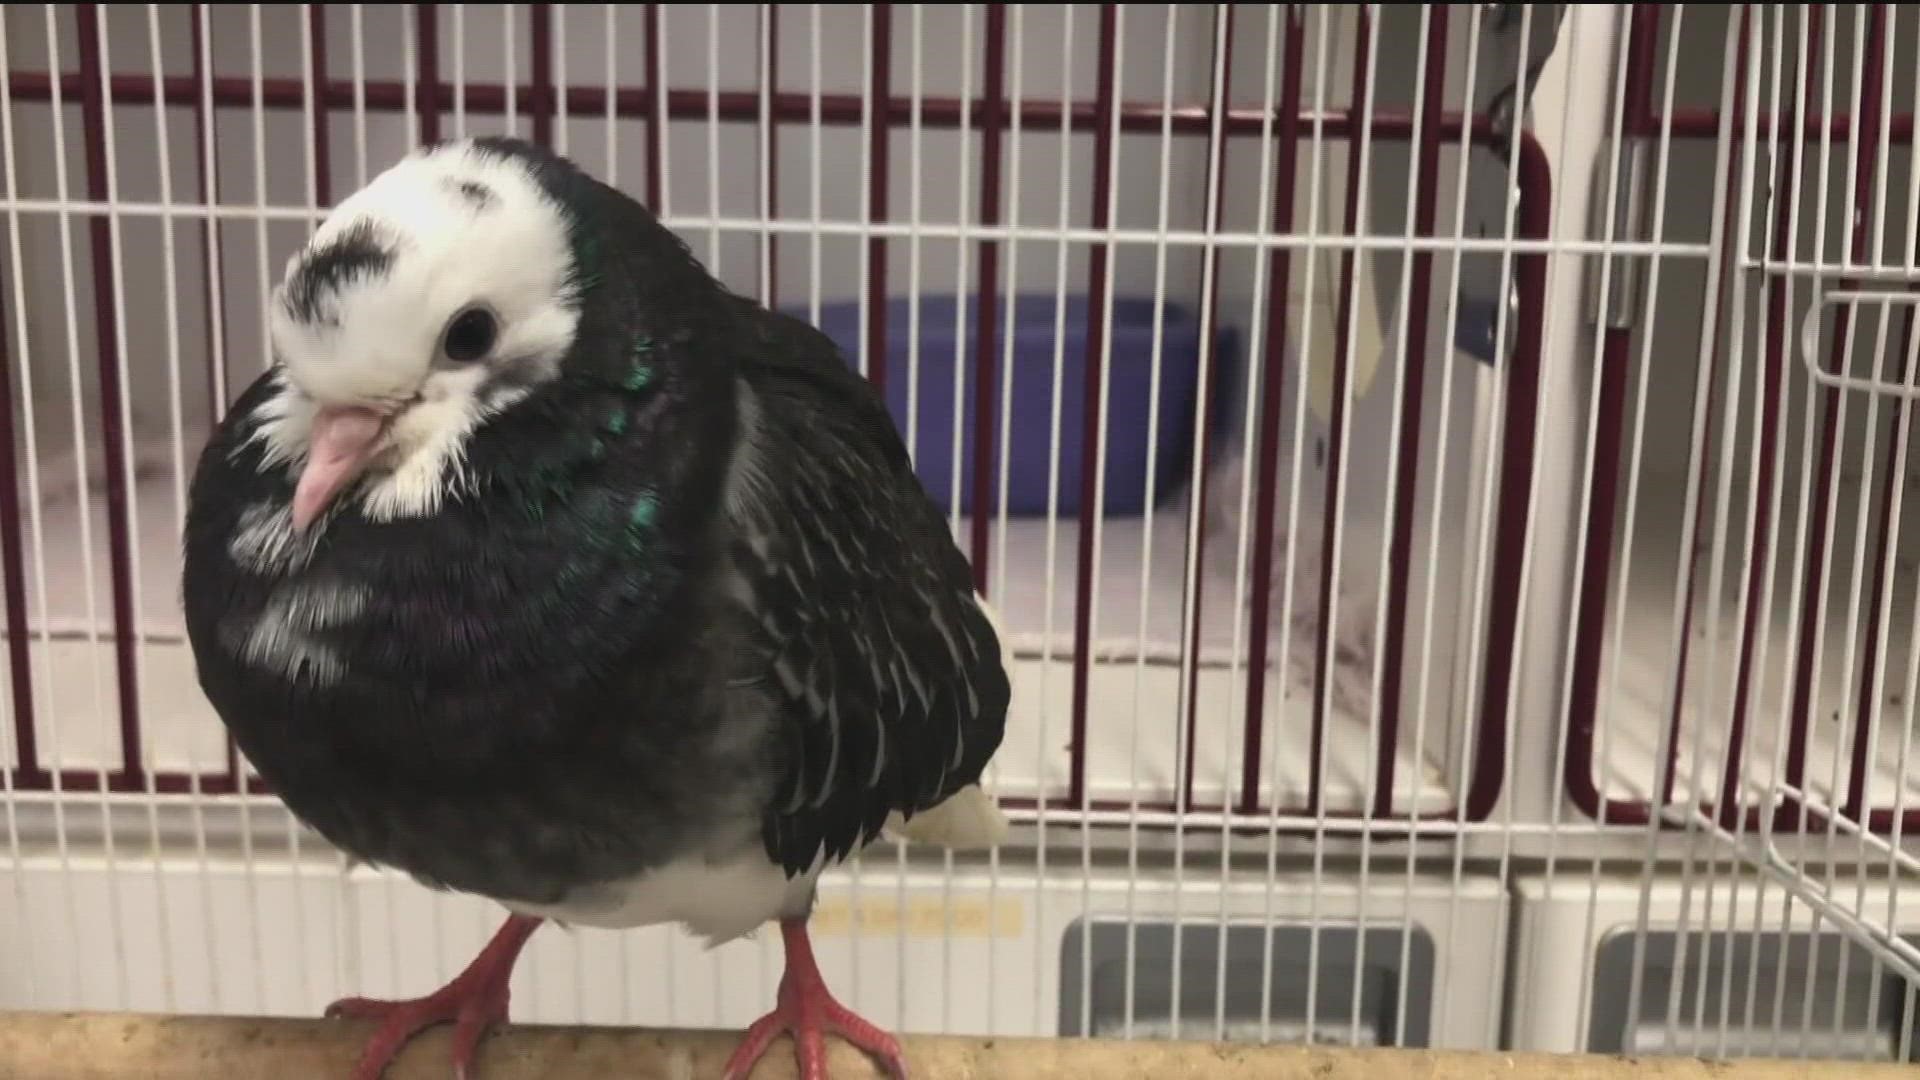 A positive case of the bird flu is now confirmed in San Diego County according to the San Diego Humane Society.